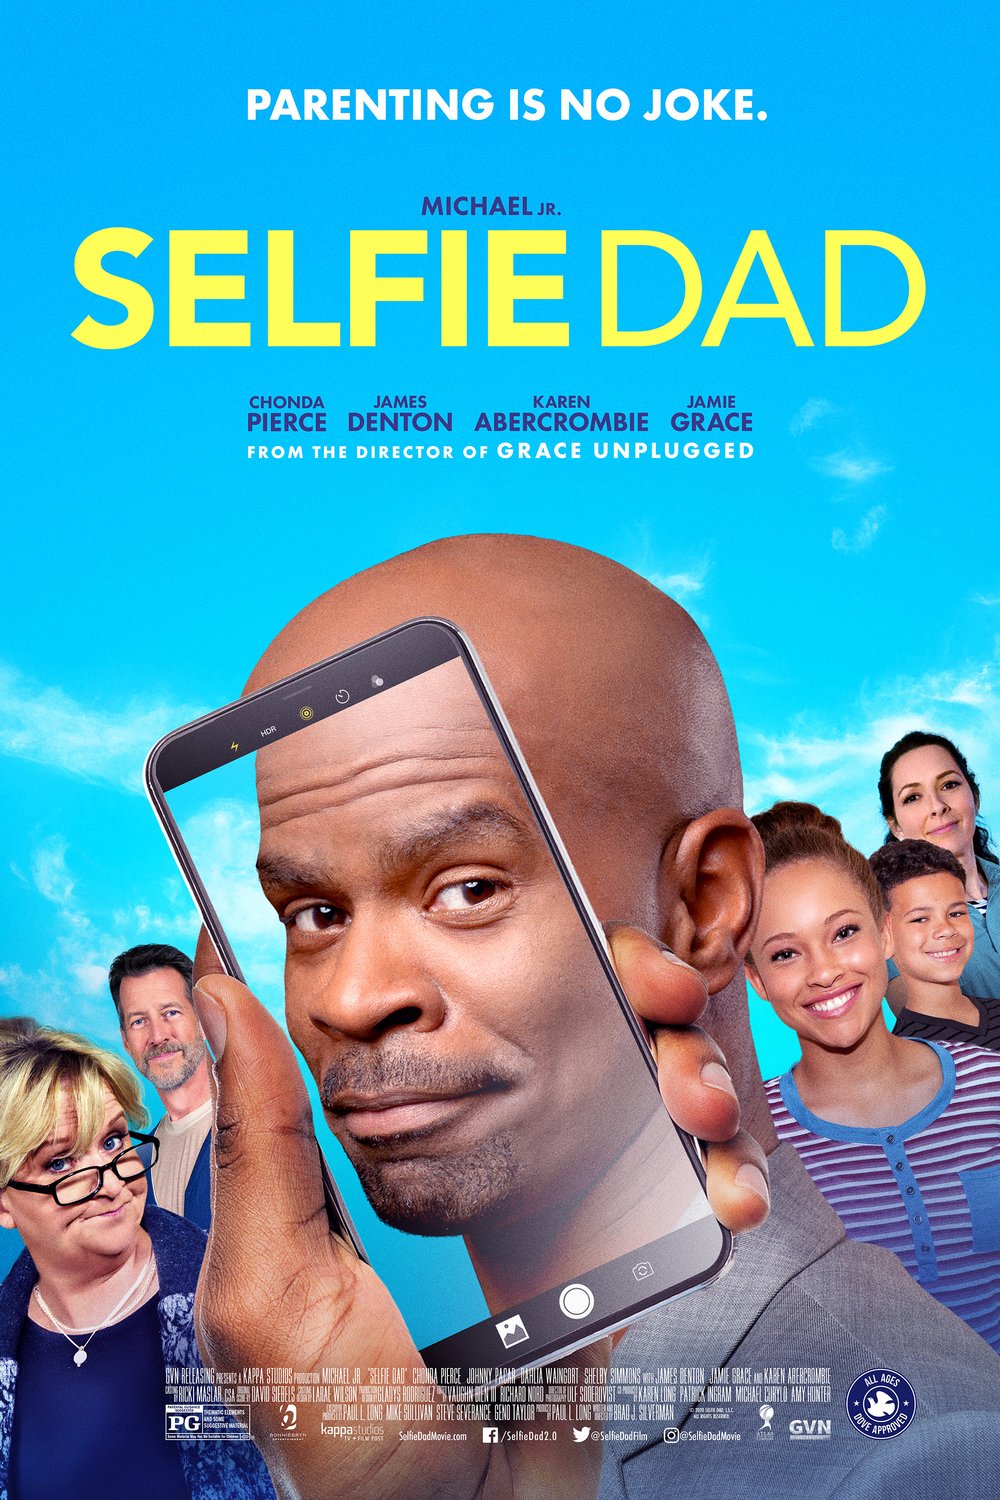 Poster of the movie Selfie Dad